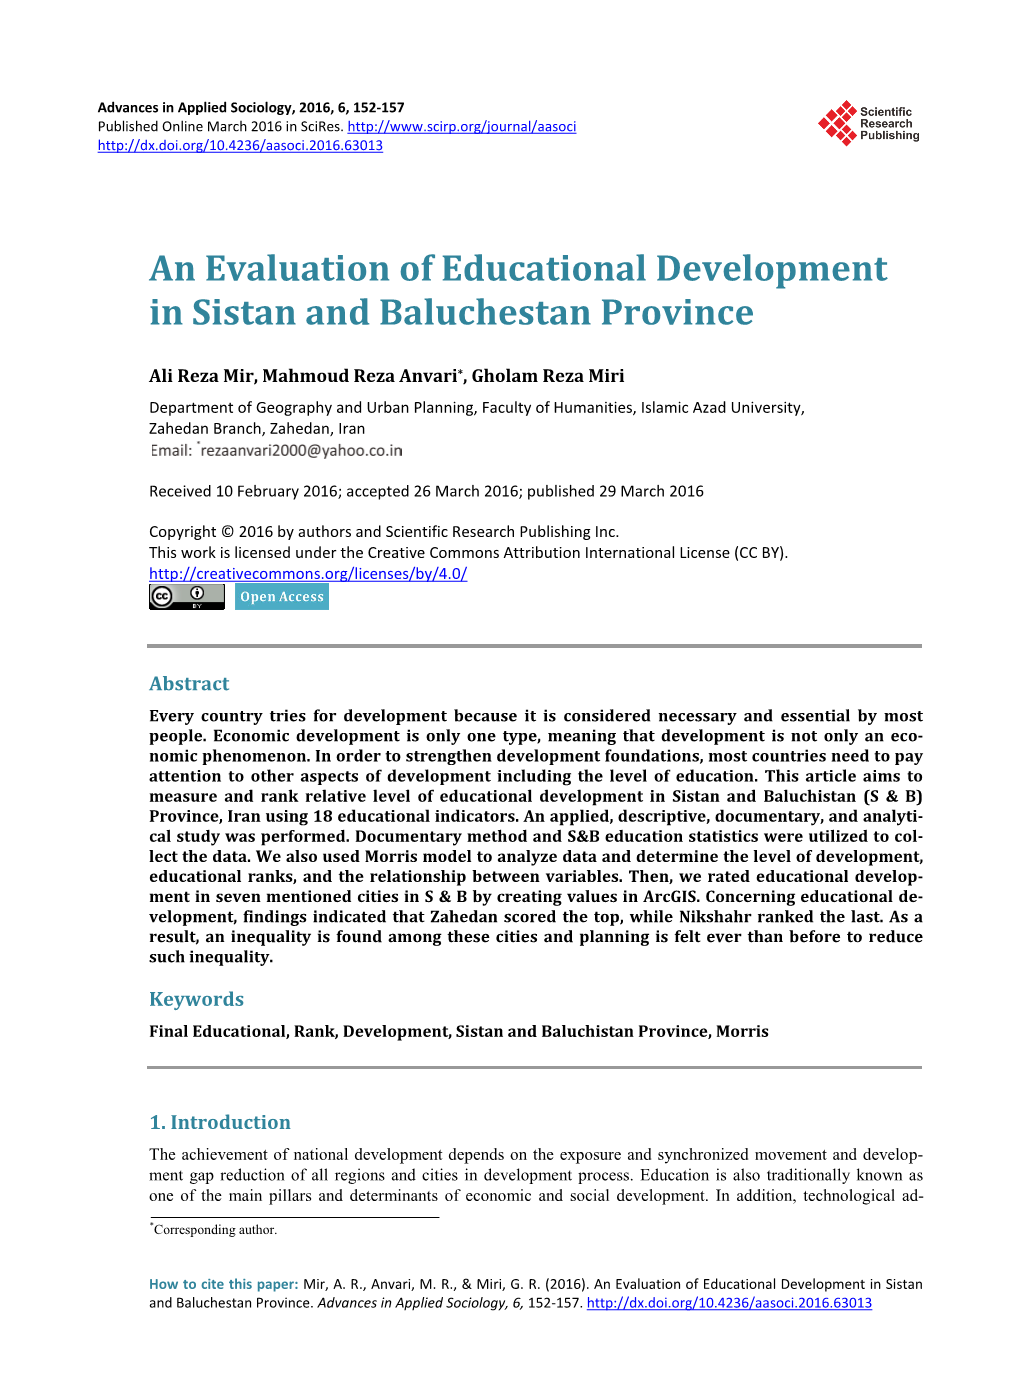 An Evaluation of Educational Development in Sistan and Baluchestan Province